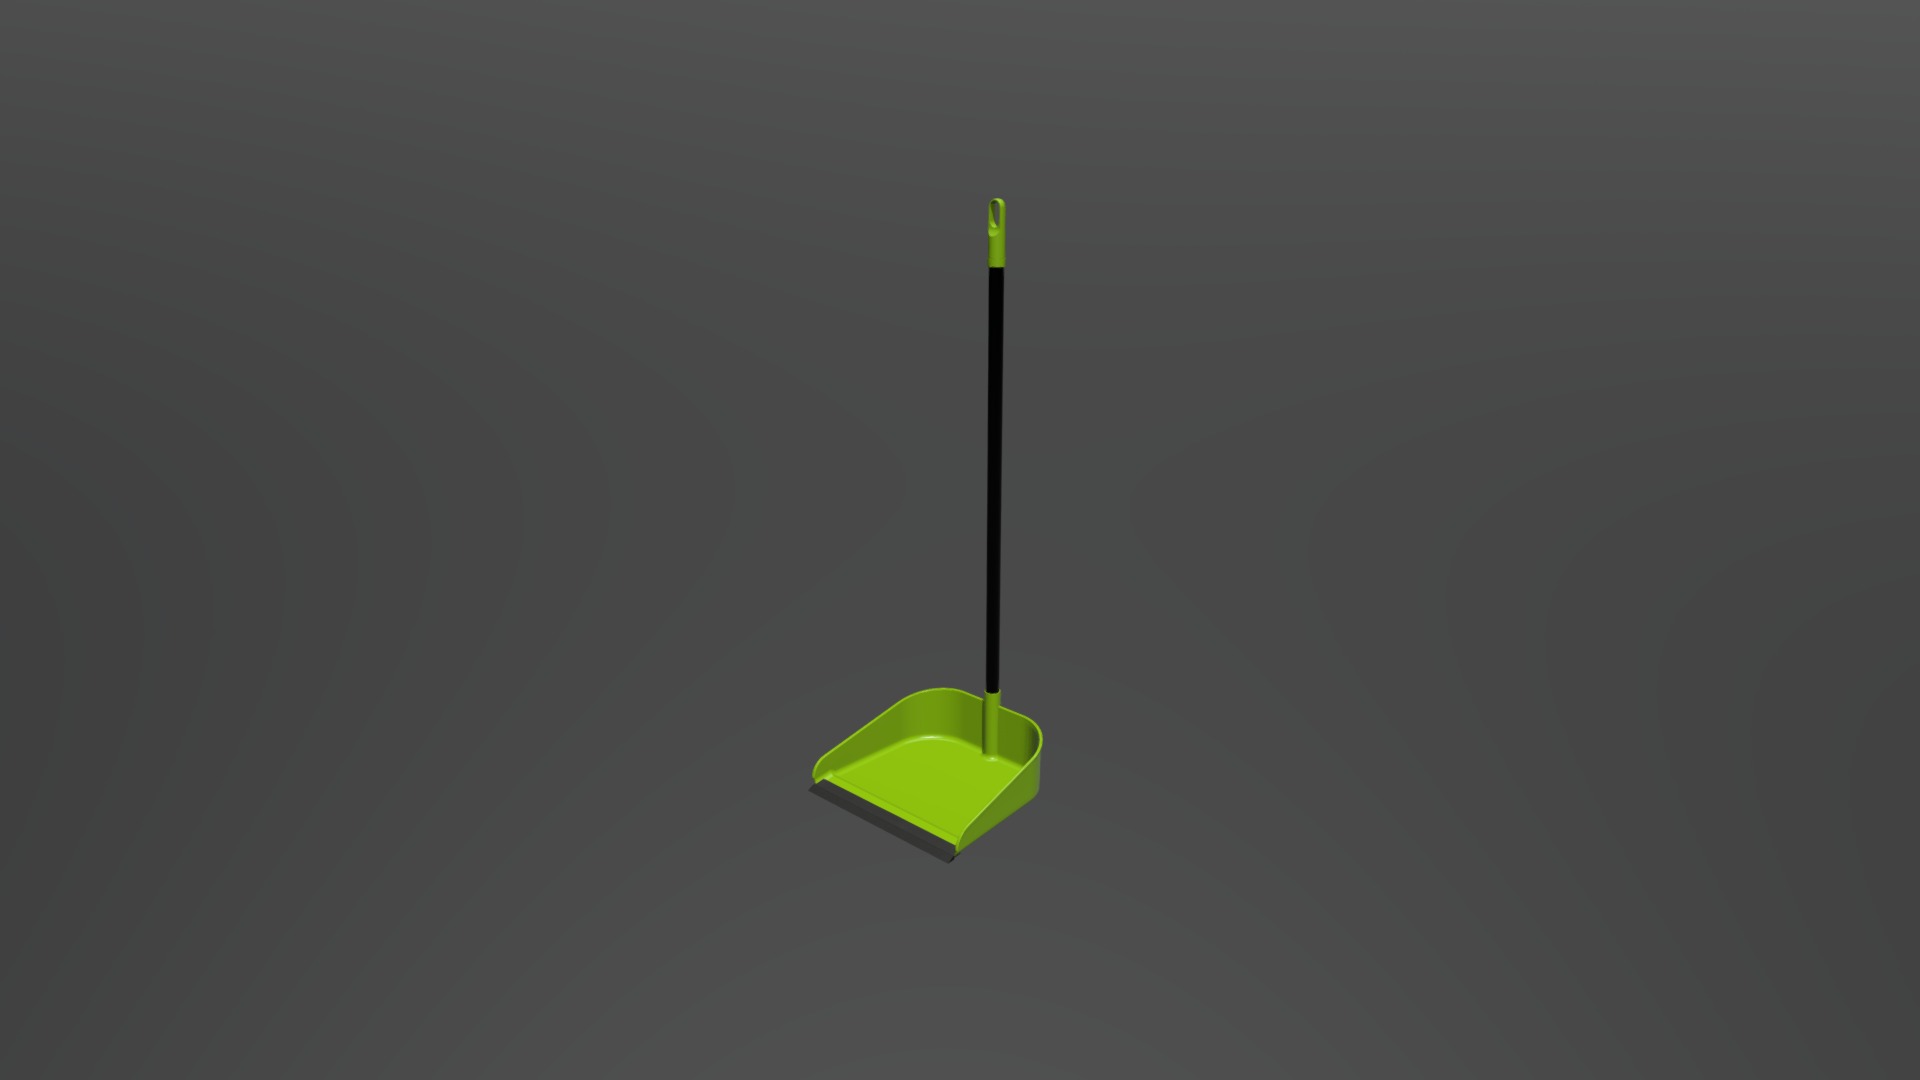 3D model Dustpan - This is a 3D model of the Dustpan. The 3D model is about a green apple logo.